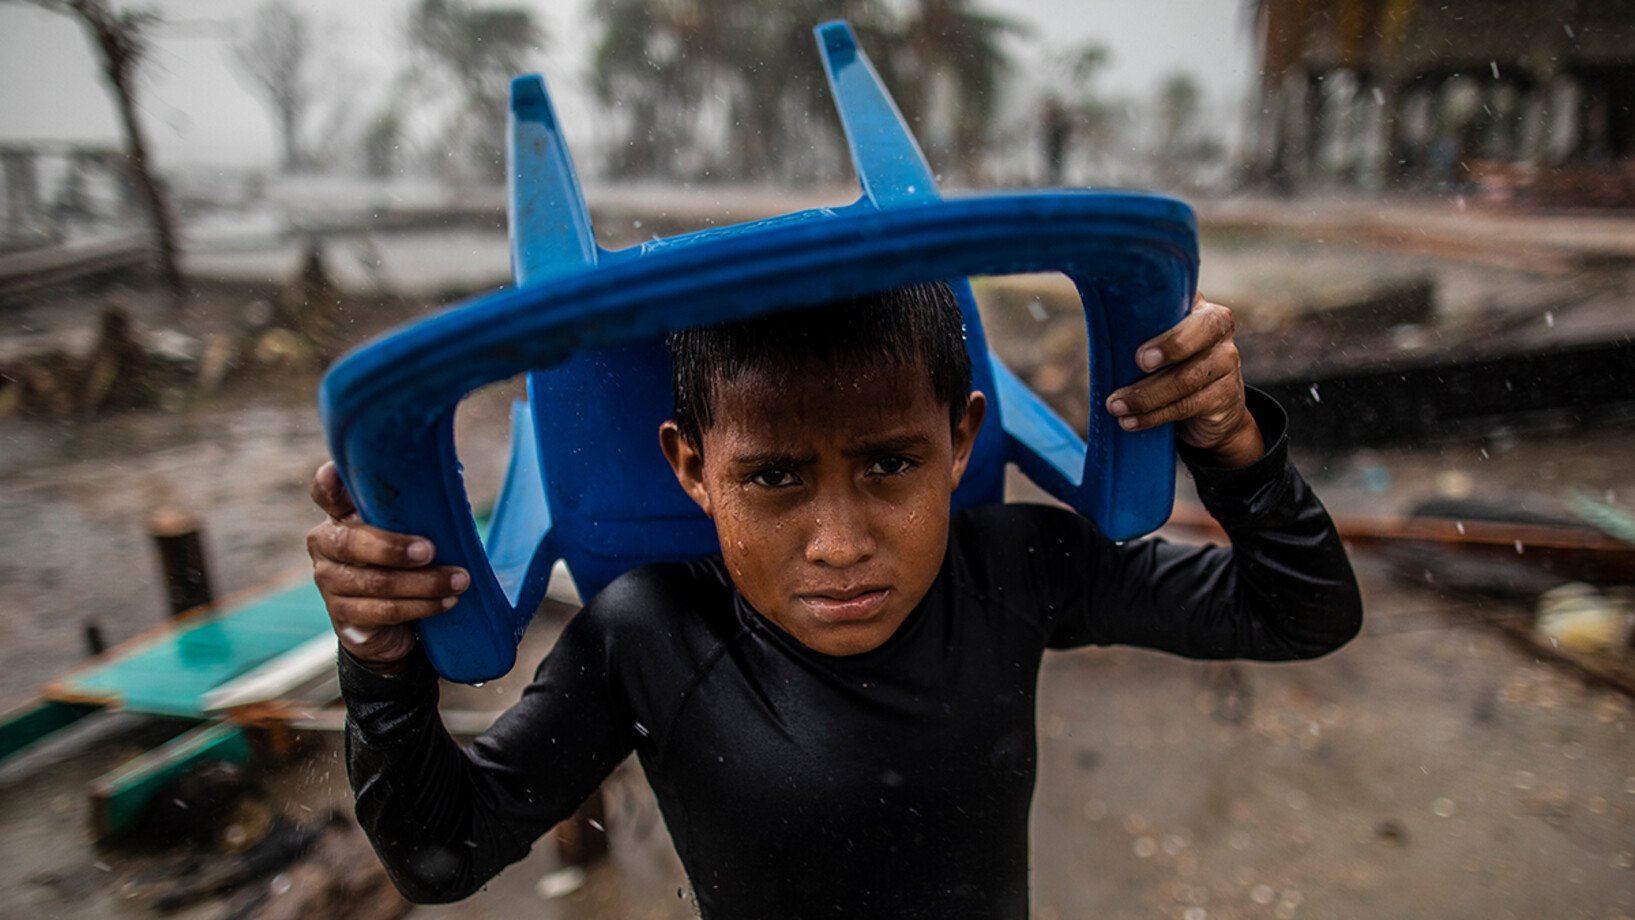 On 17 November 2020 in Bilwi, Nicaragua, a child protects himself from the heavy rain with a plastic chair, standing in the spot where his house used to be, after it was destroyed by the strong winds, swells and rains brought by Hurricane Iota.